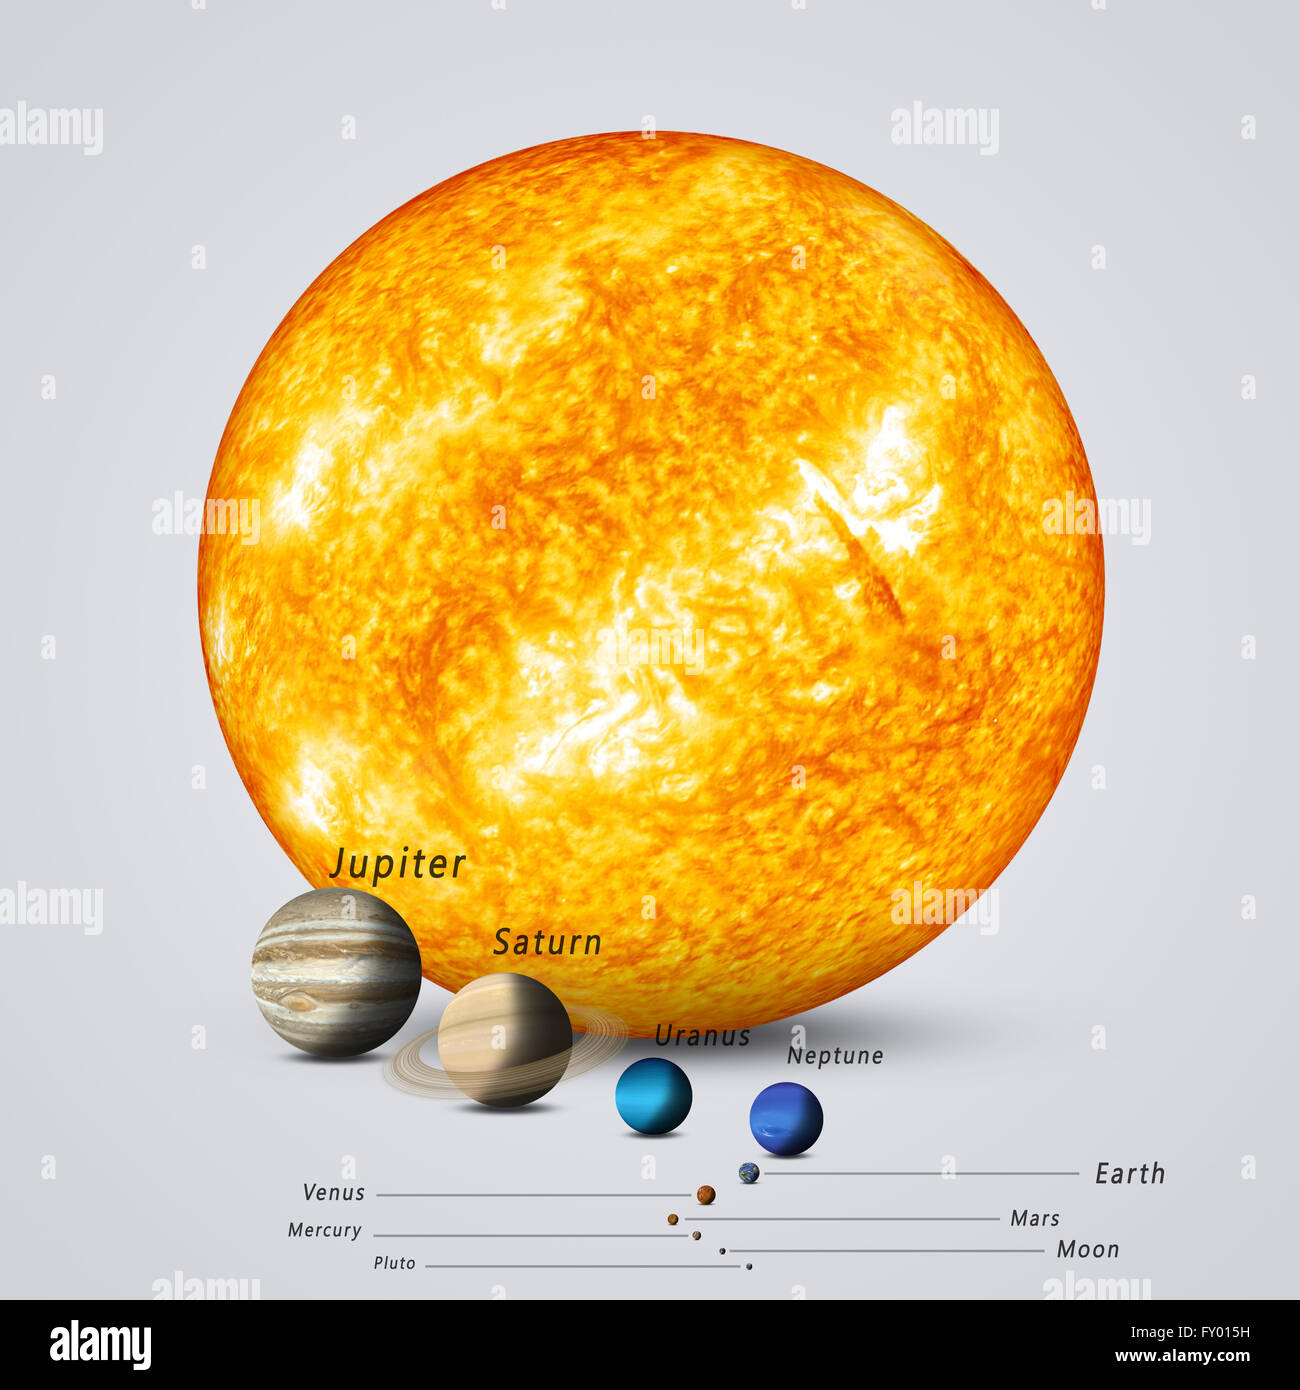 the sun compared to the earth